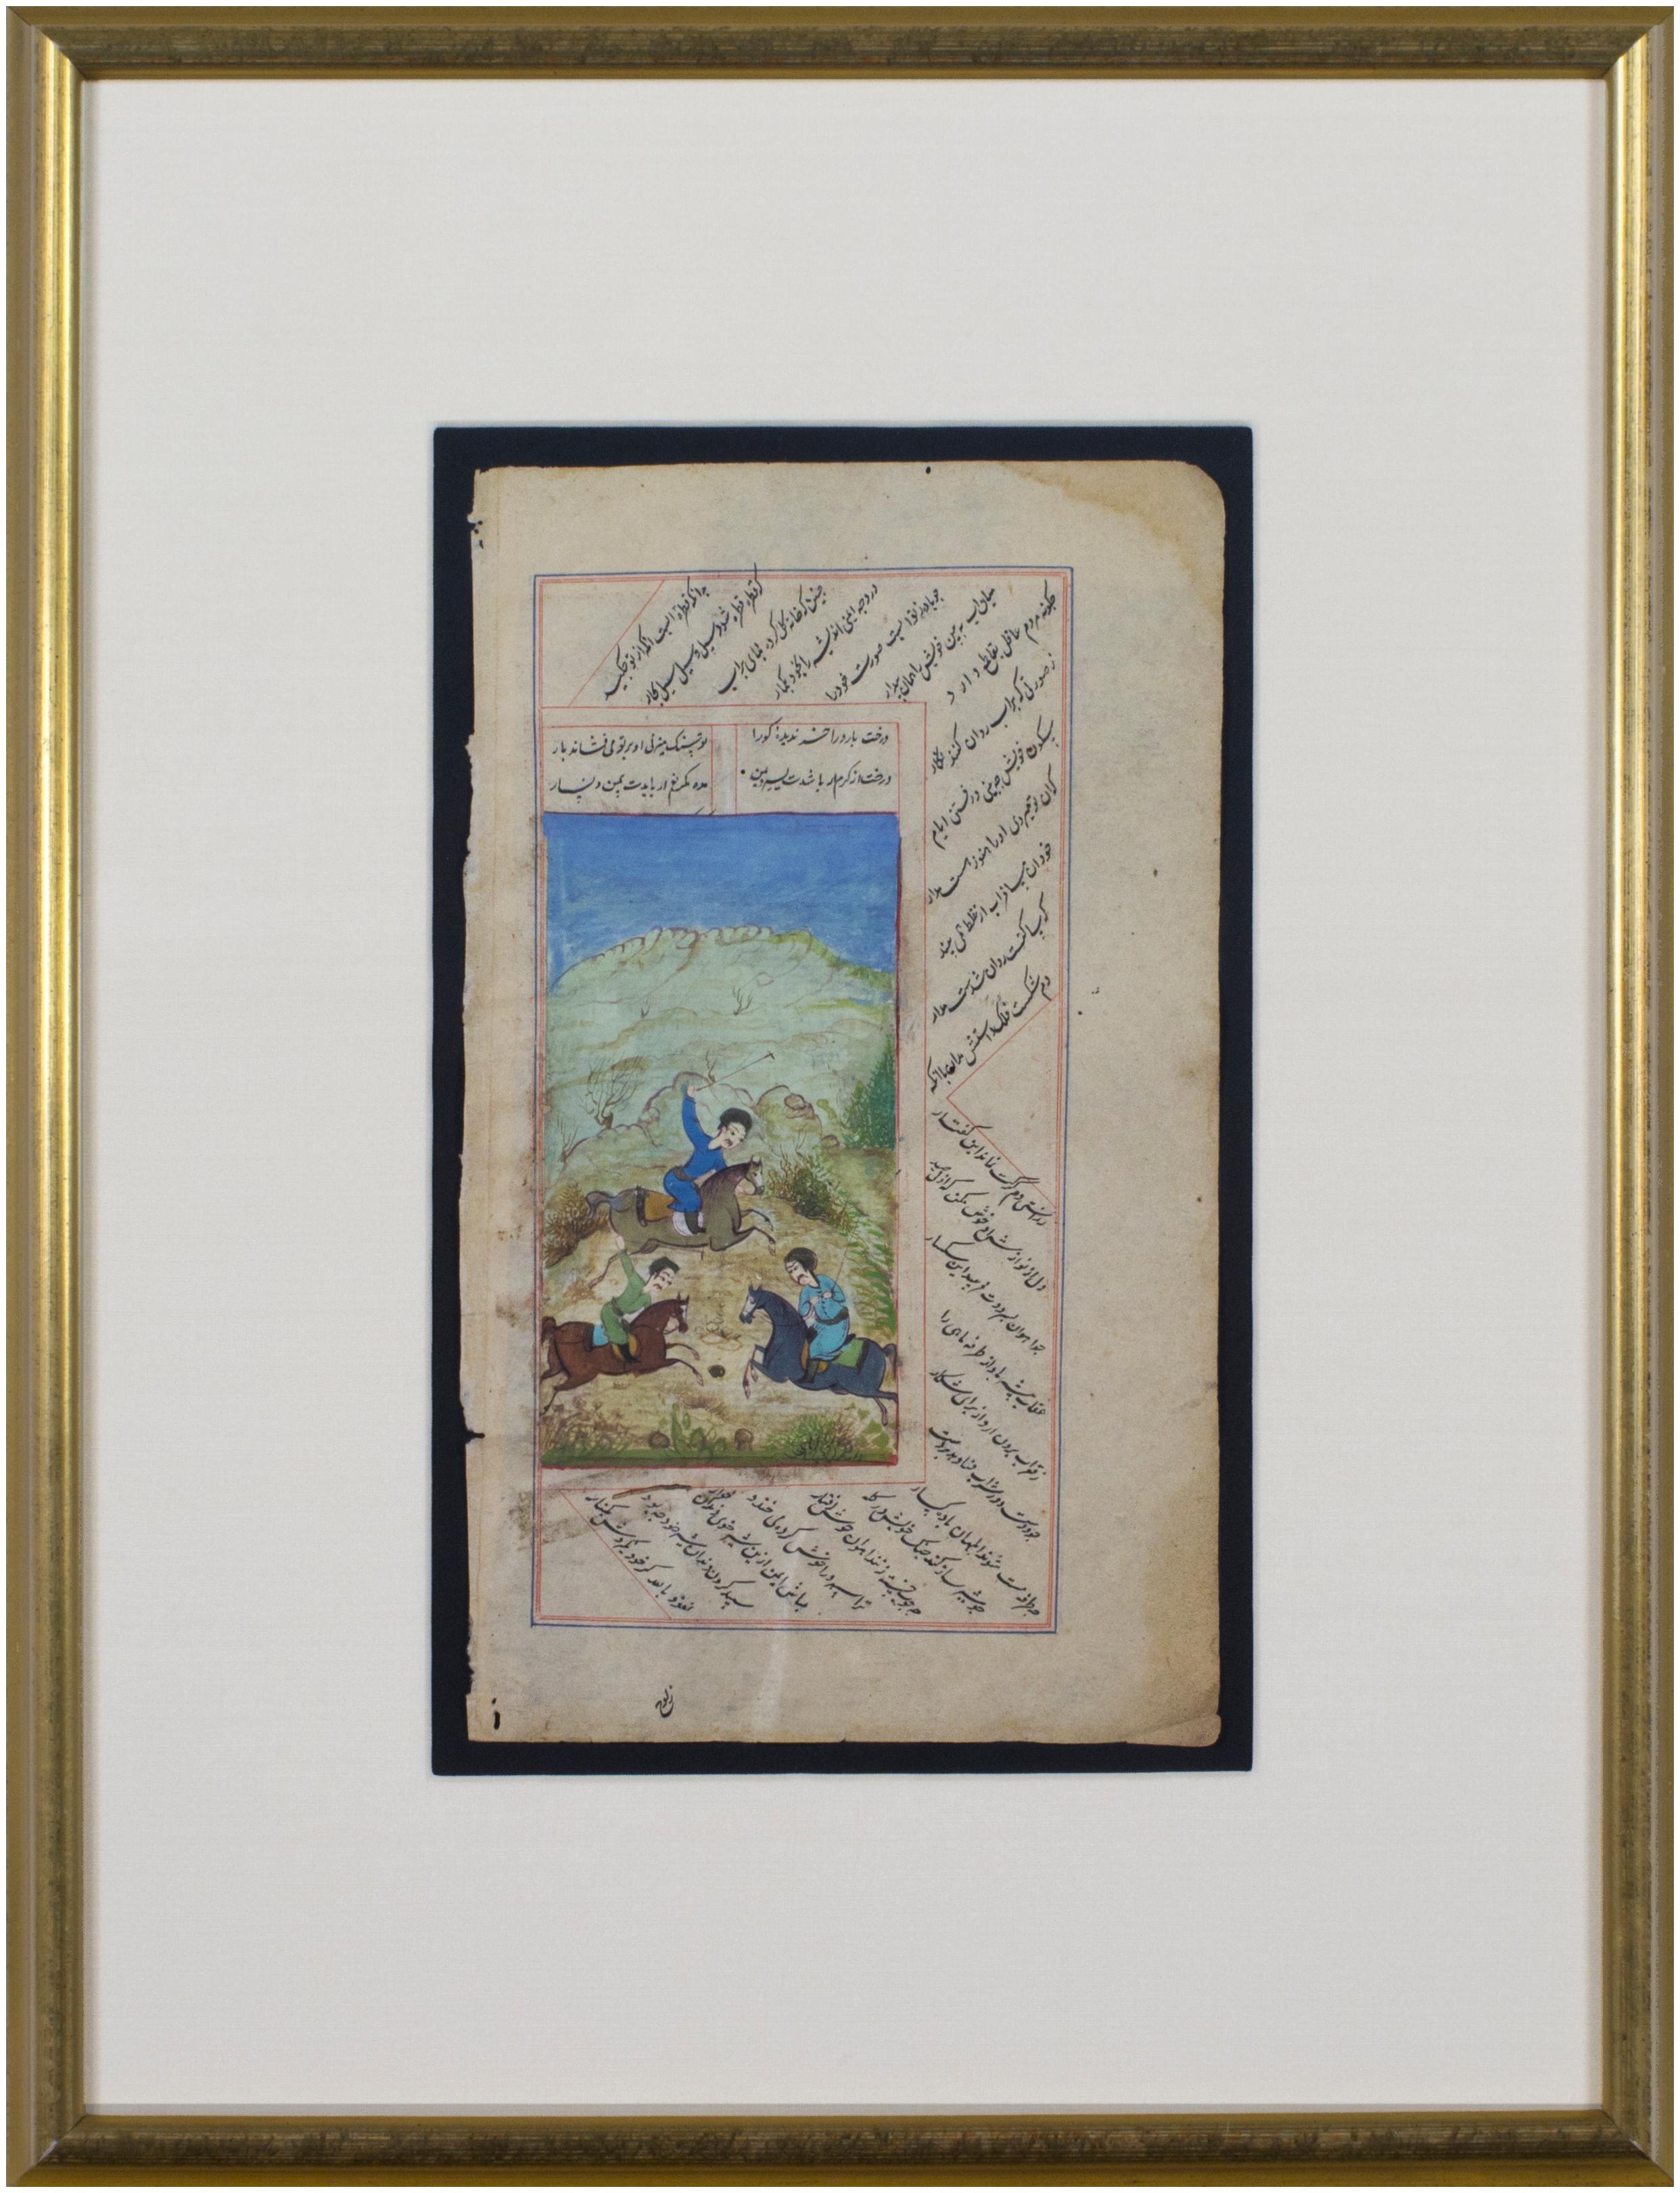 Persian Illuminated Miniature with Three Figures Playing Polo in a Landscape - Painting by Unknown